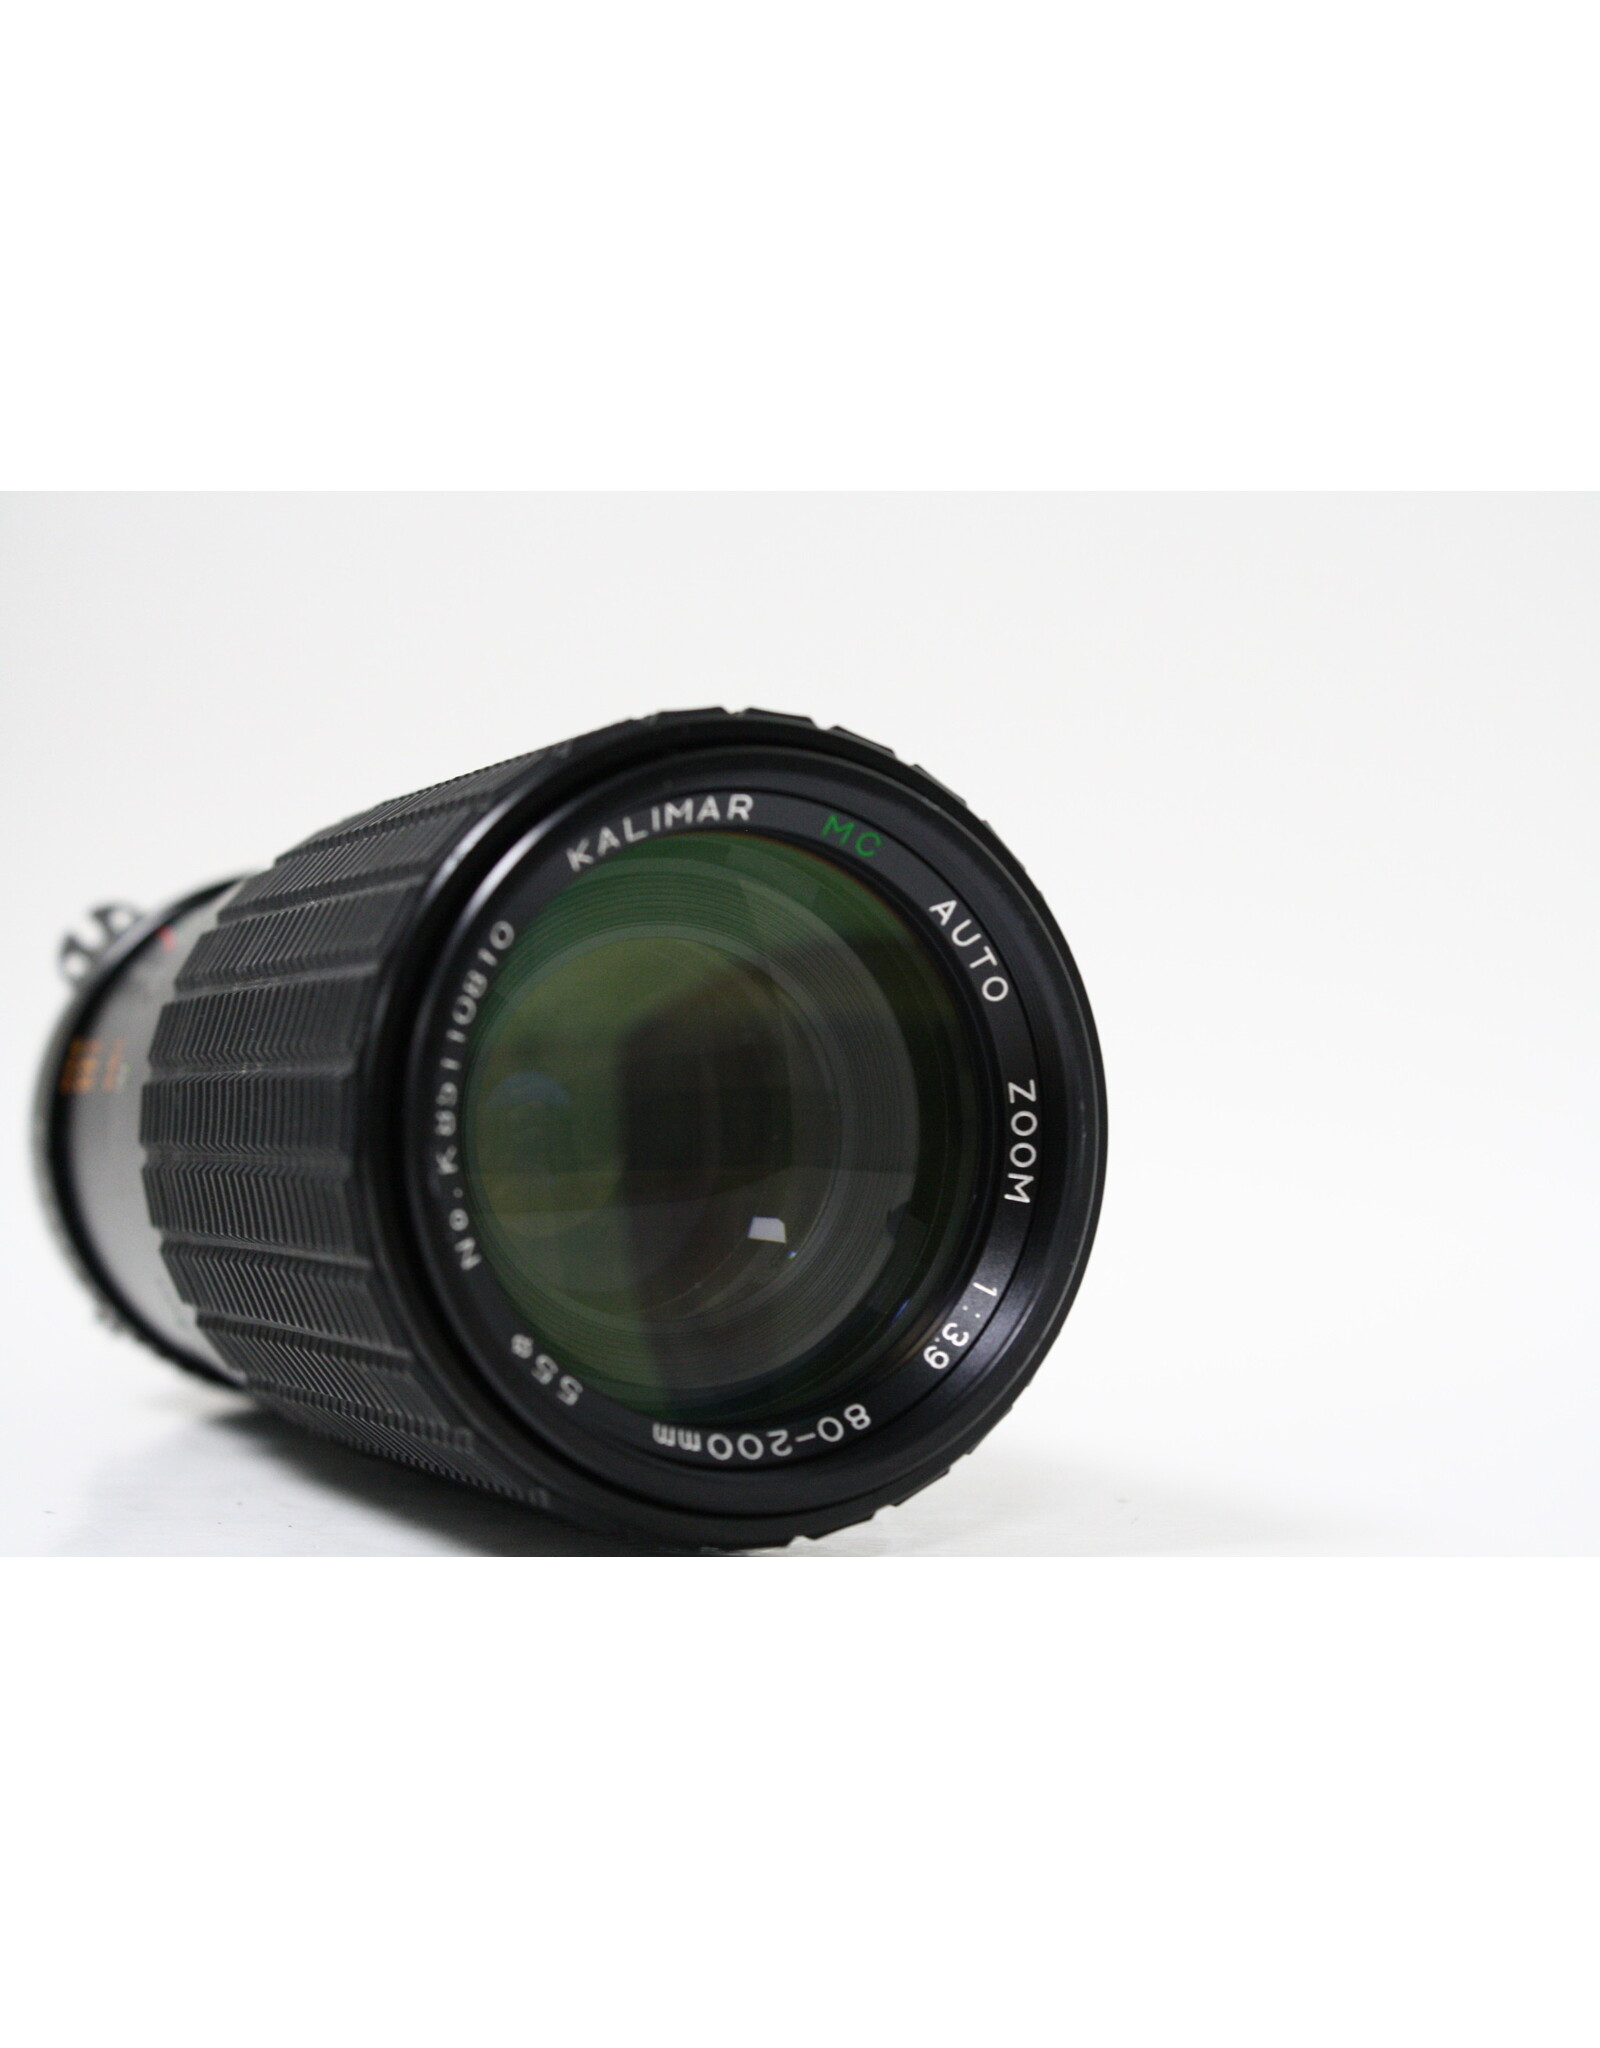 Kalimar Kalimar 80-200mm f3.9 Manual Focus Lens for Nikon AI with Case (Pre-owned)